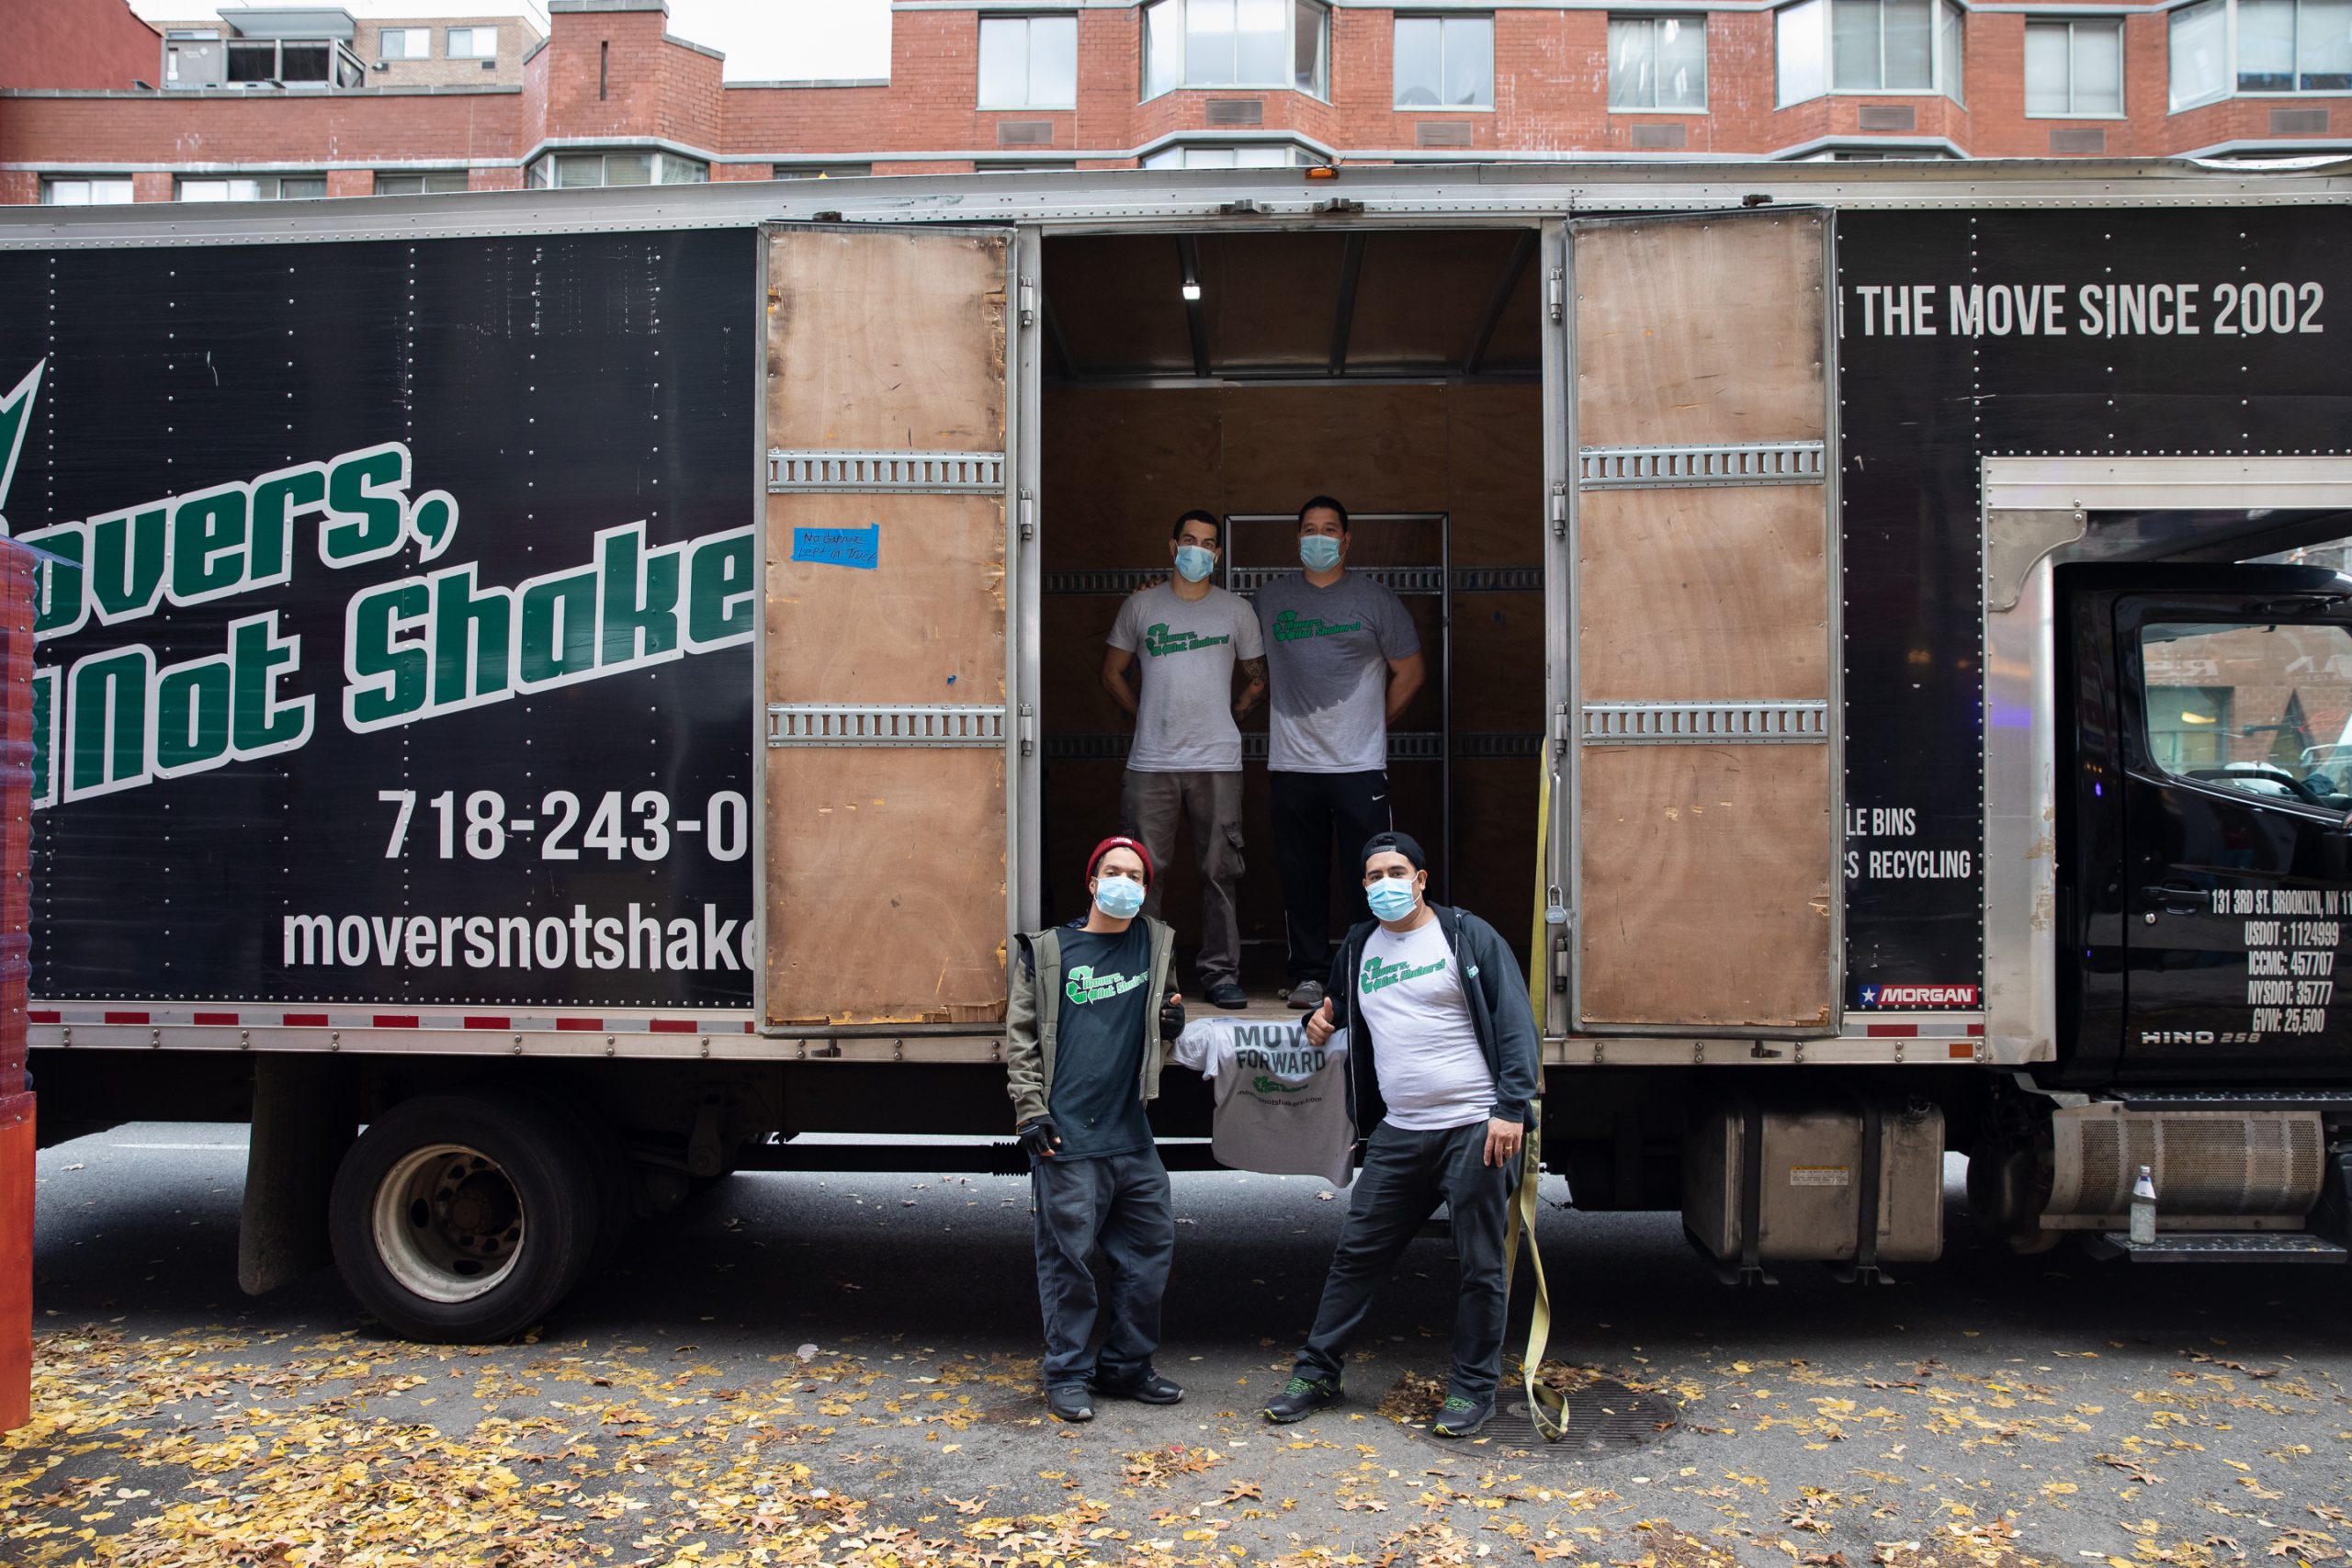 Nolita movers in front of a Movers Not Shakers truck